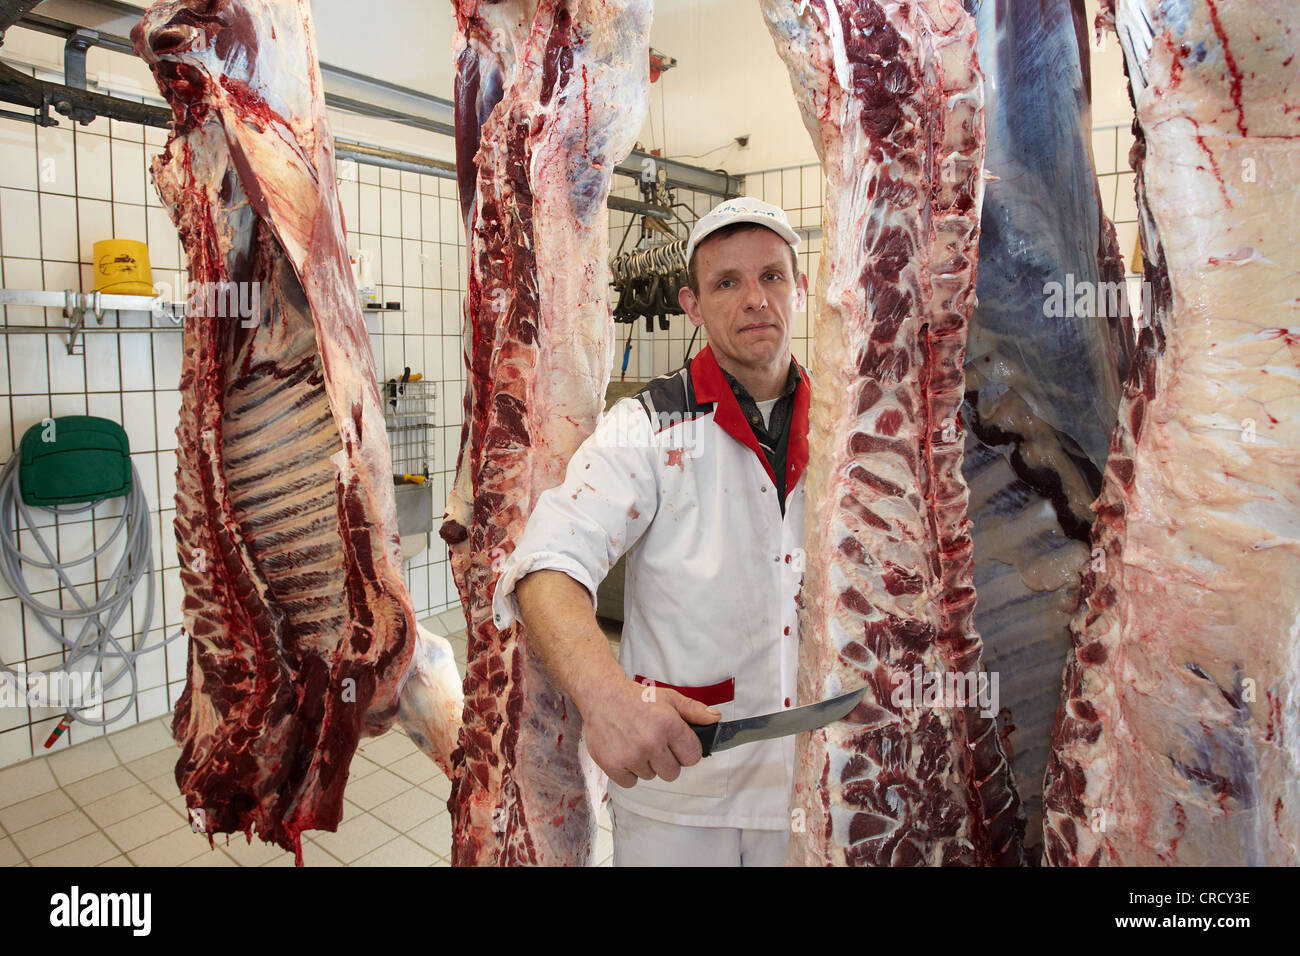 Master butcher Hans Werner Seul with slaughtered bulls, Dieblich, Rhineland-Palatinate, Germany, Europe Stock Photo